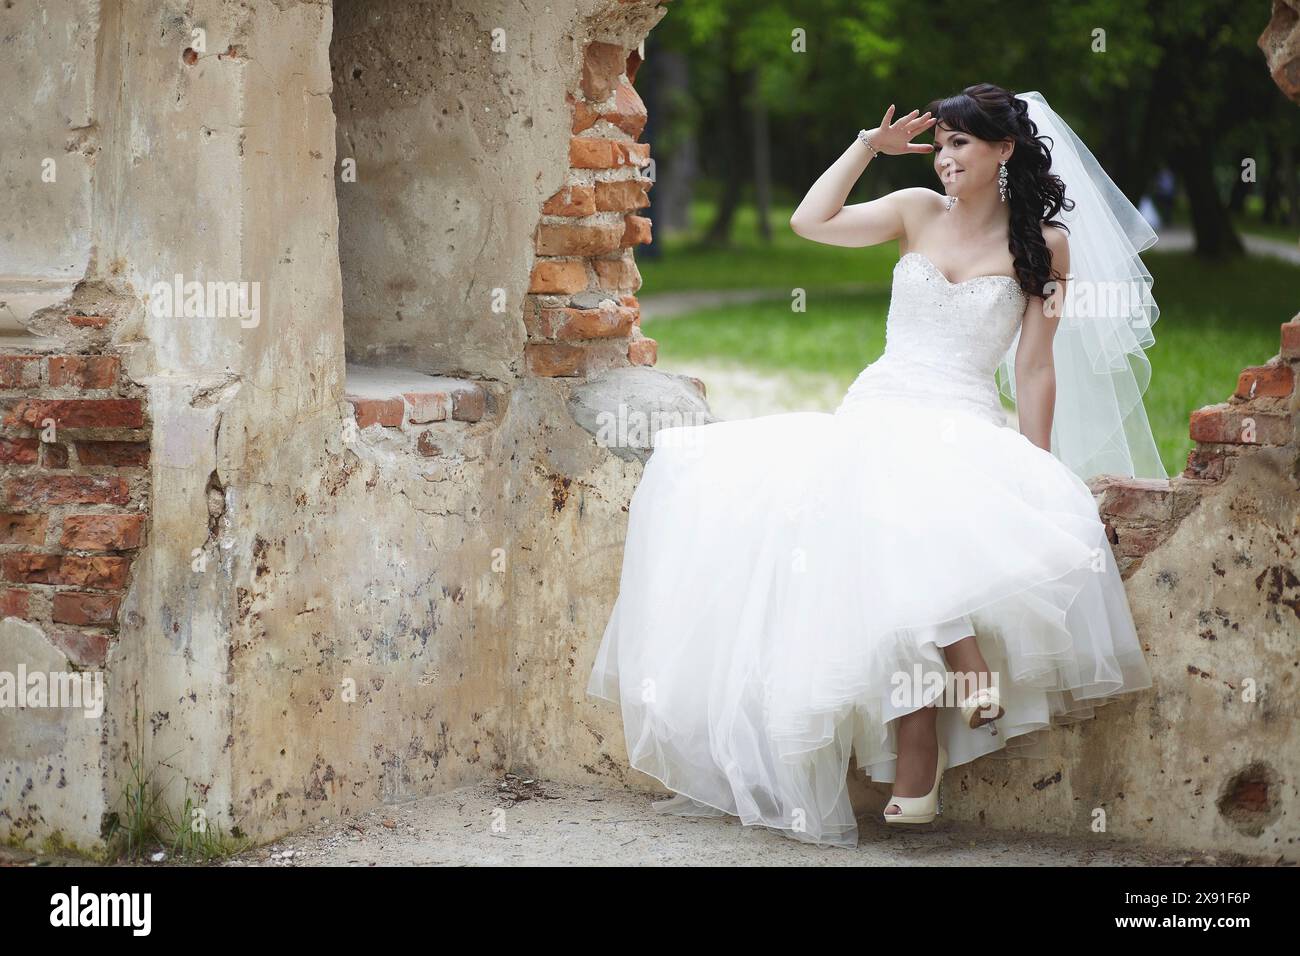 A bride in a white wedding dress with a veil sitting by an old brick wall outdoors, smiling under natural light.Belarus, Minsk Stock Photo